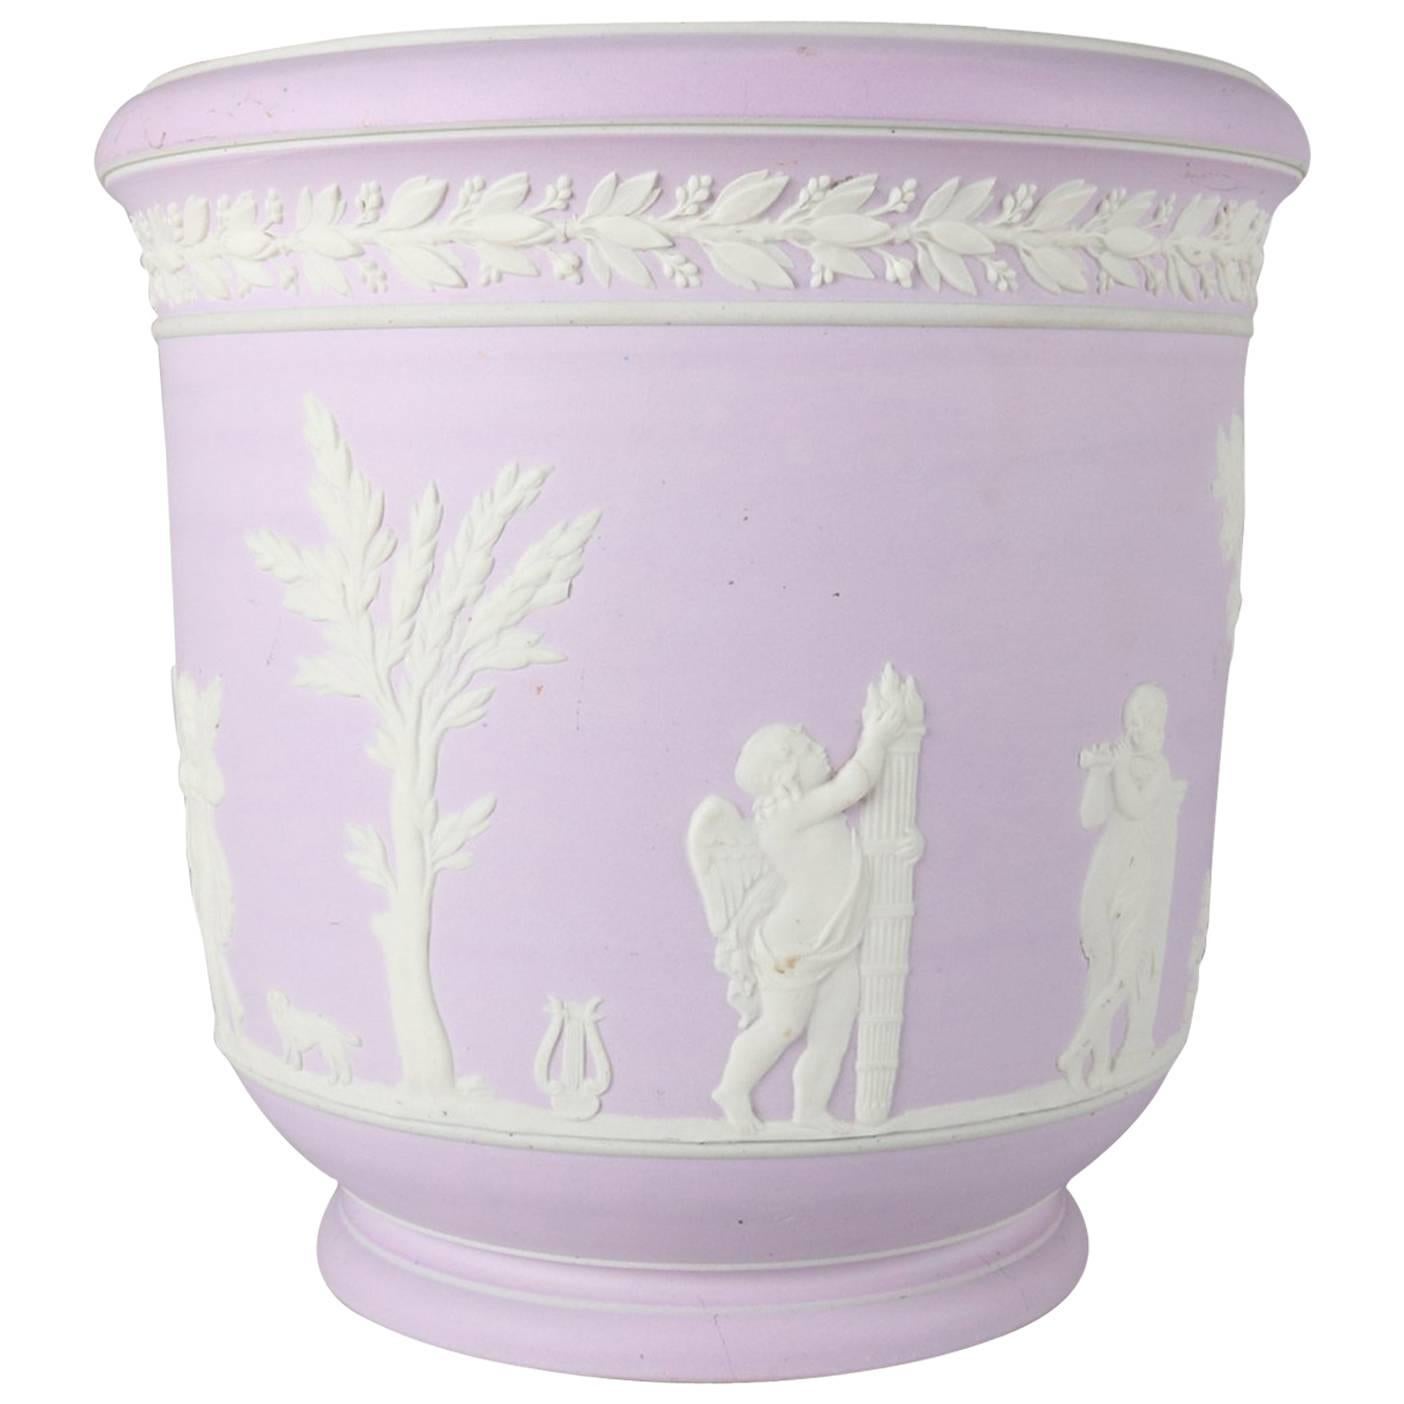 indoor planter Wedgwood pottery Wedgwood plant pot Wedgwood Campion Planter indoor plant pot Wedgwood collectable China